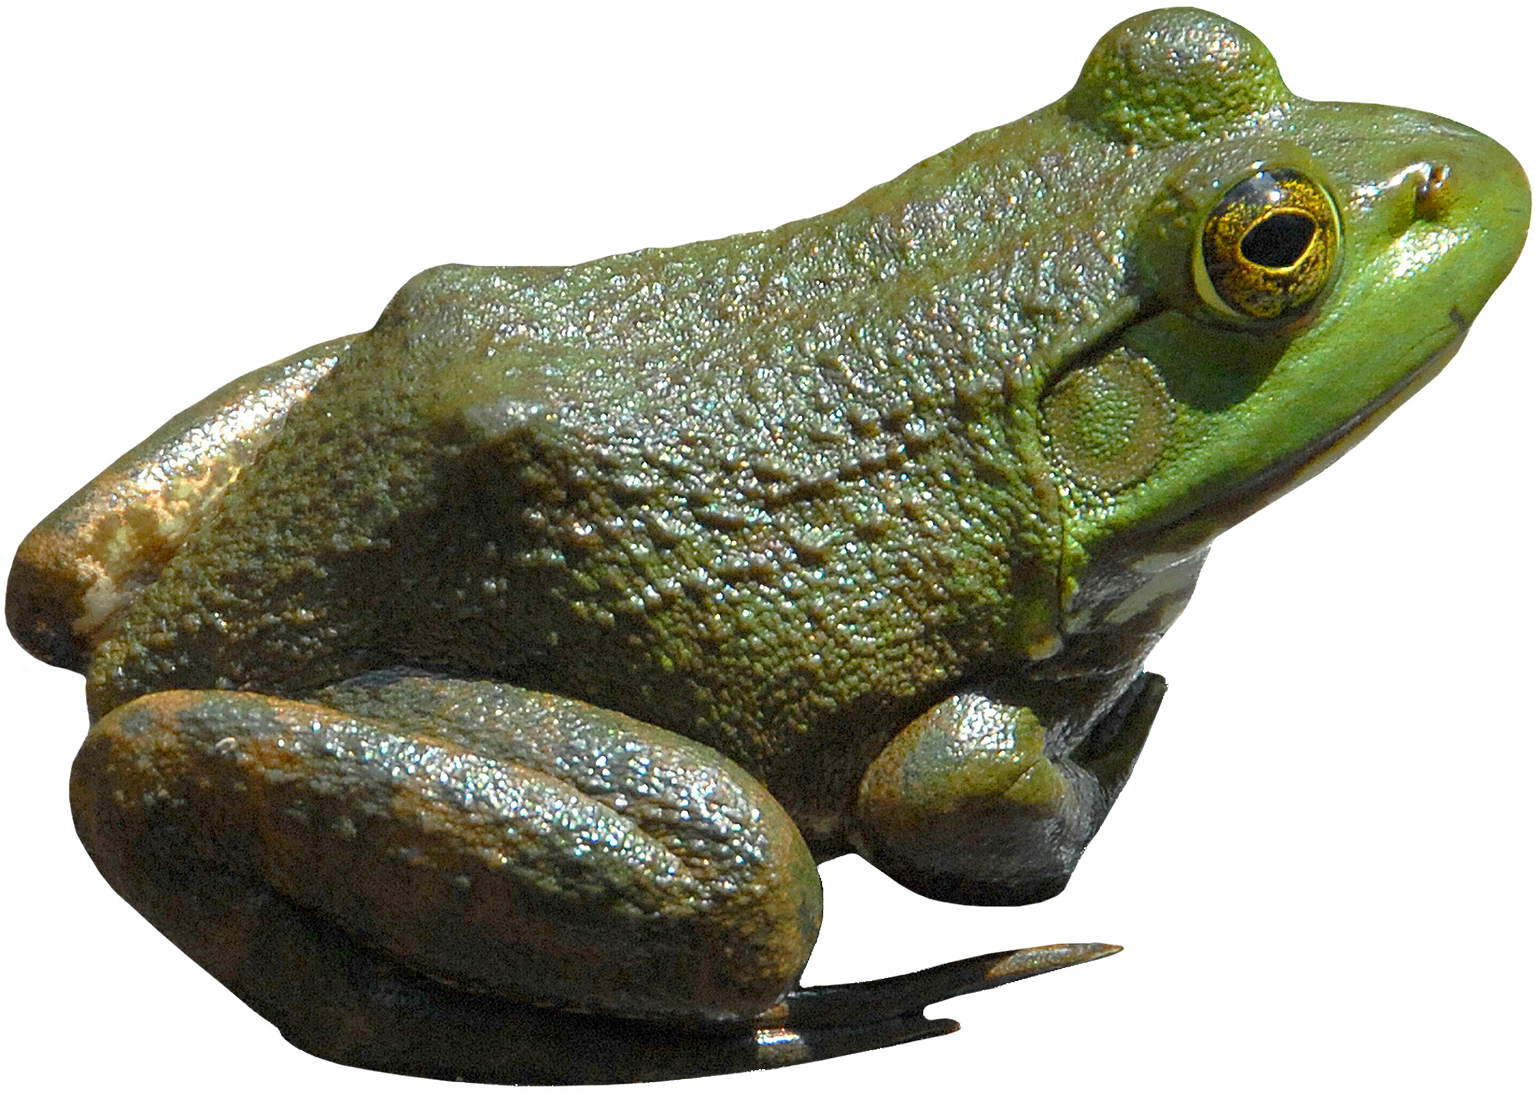 frog clipart tired